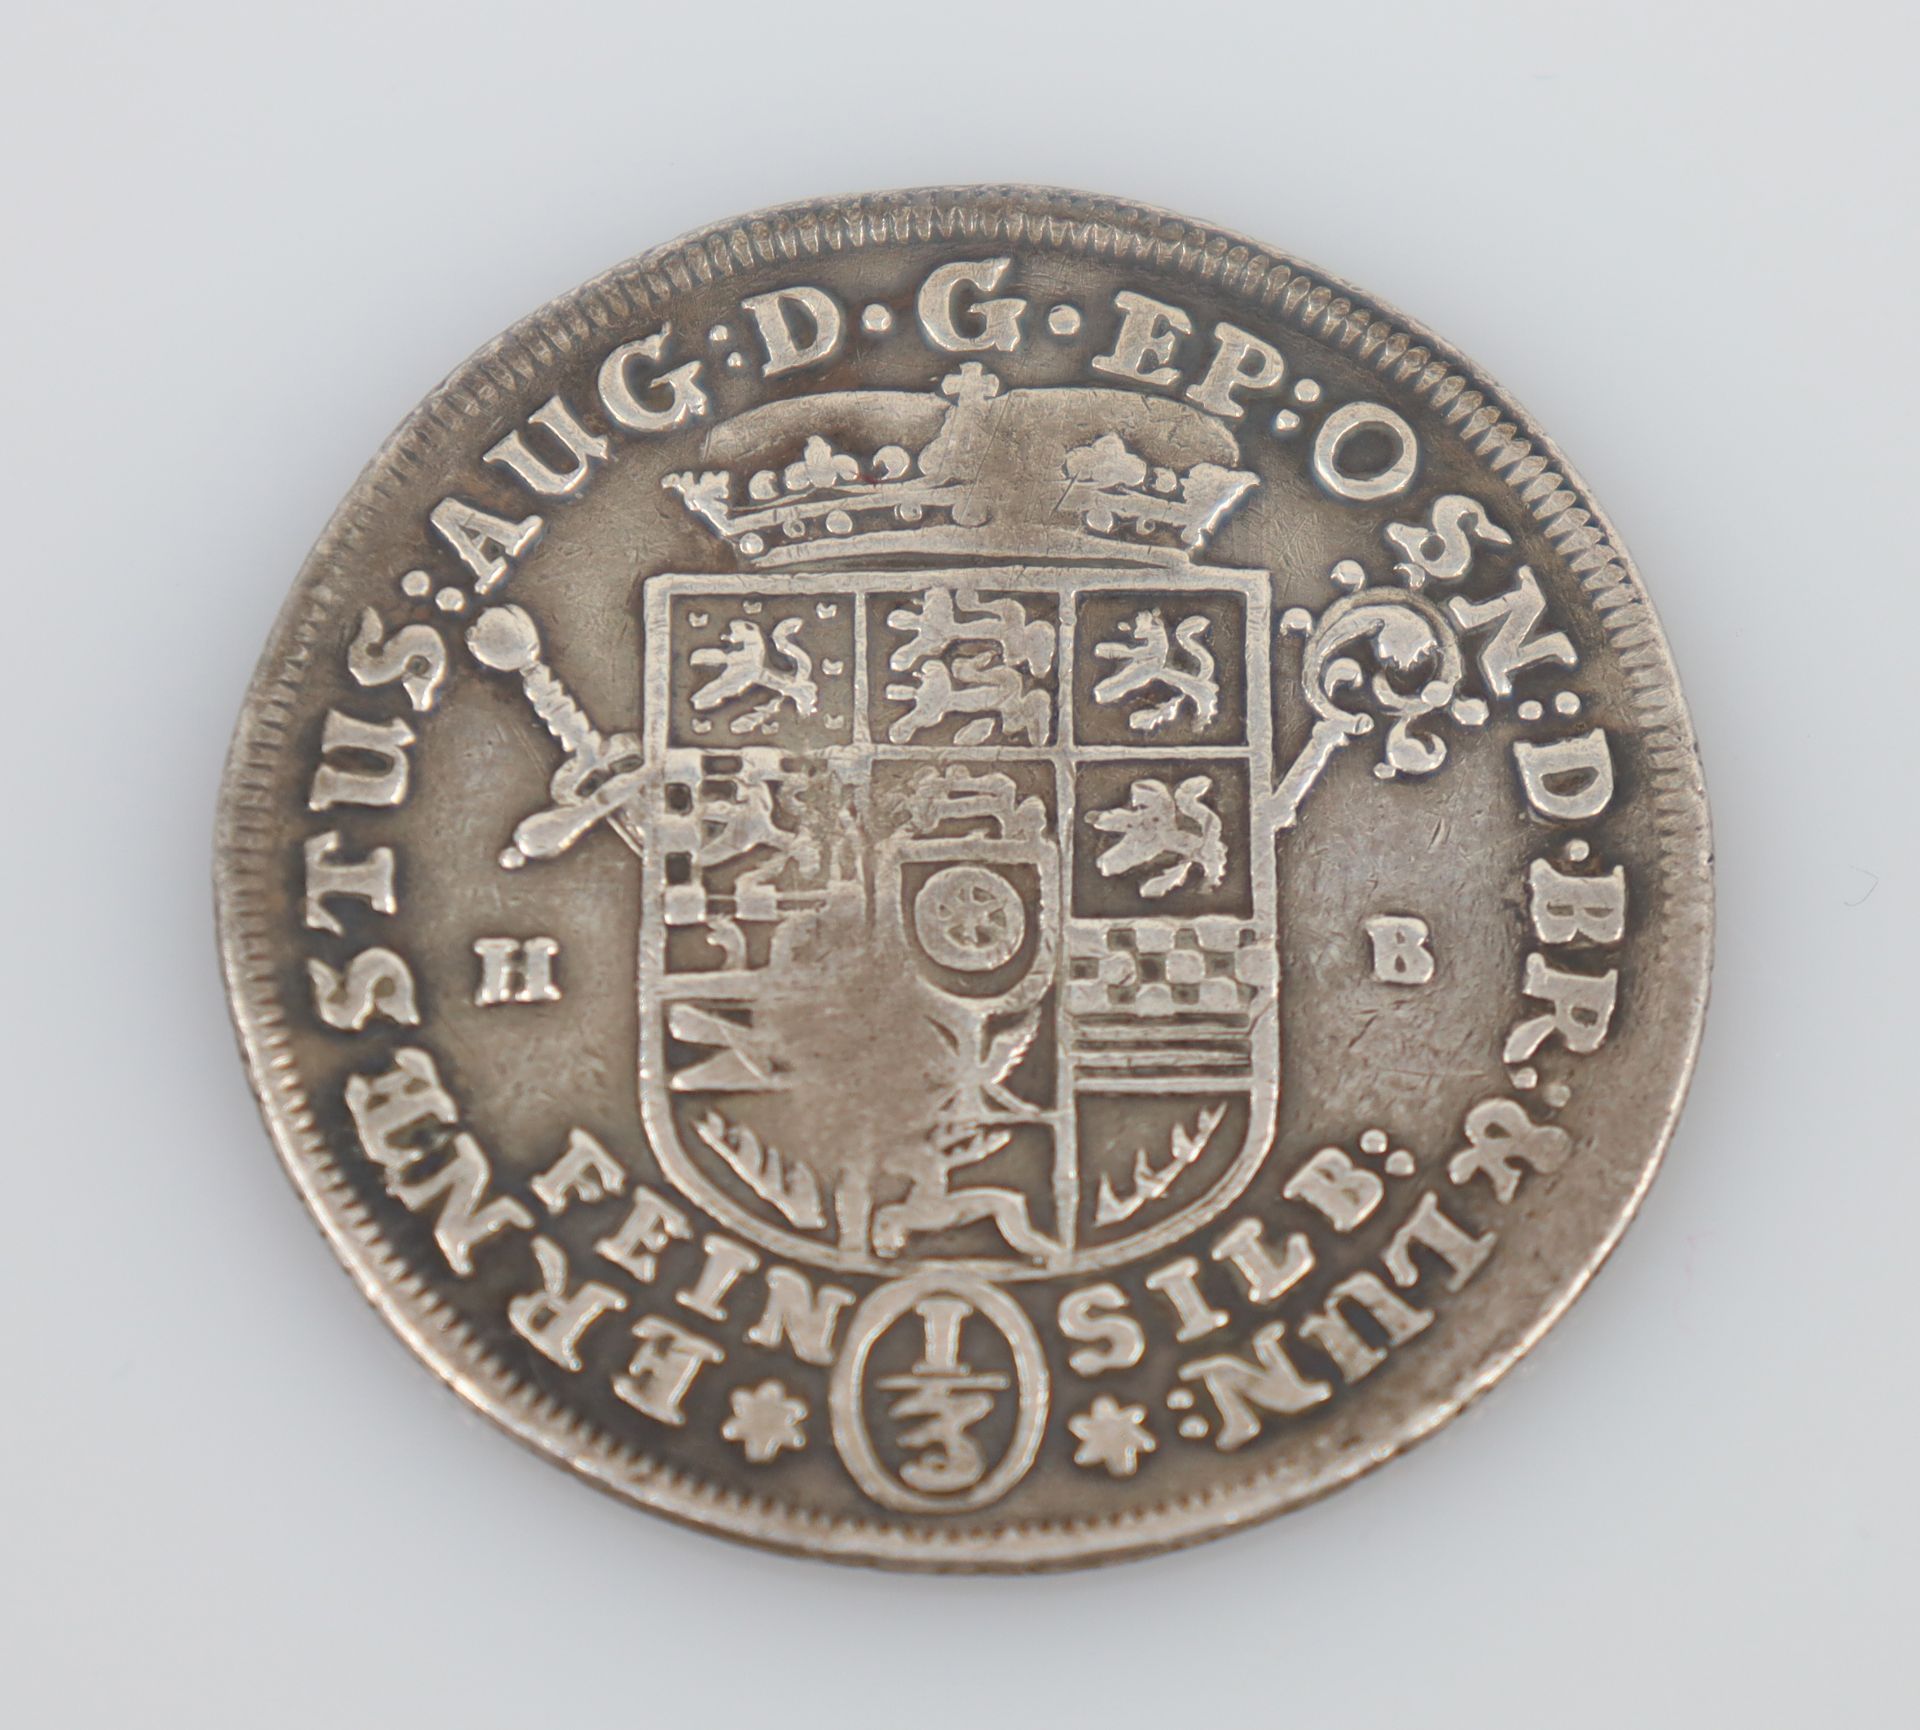 1/3 Reichstaler. Imperial thaler. Duchy of Brunswick and Lüneburg. Silver coin. 1692. - Image 2 of 3